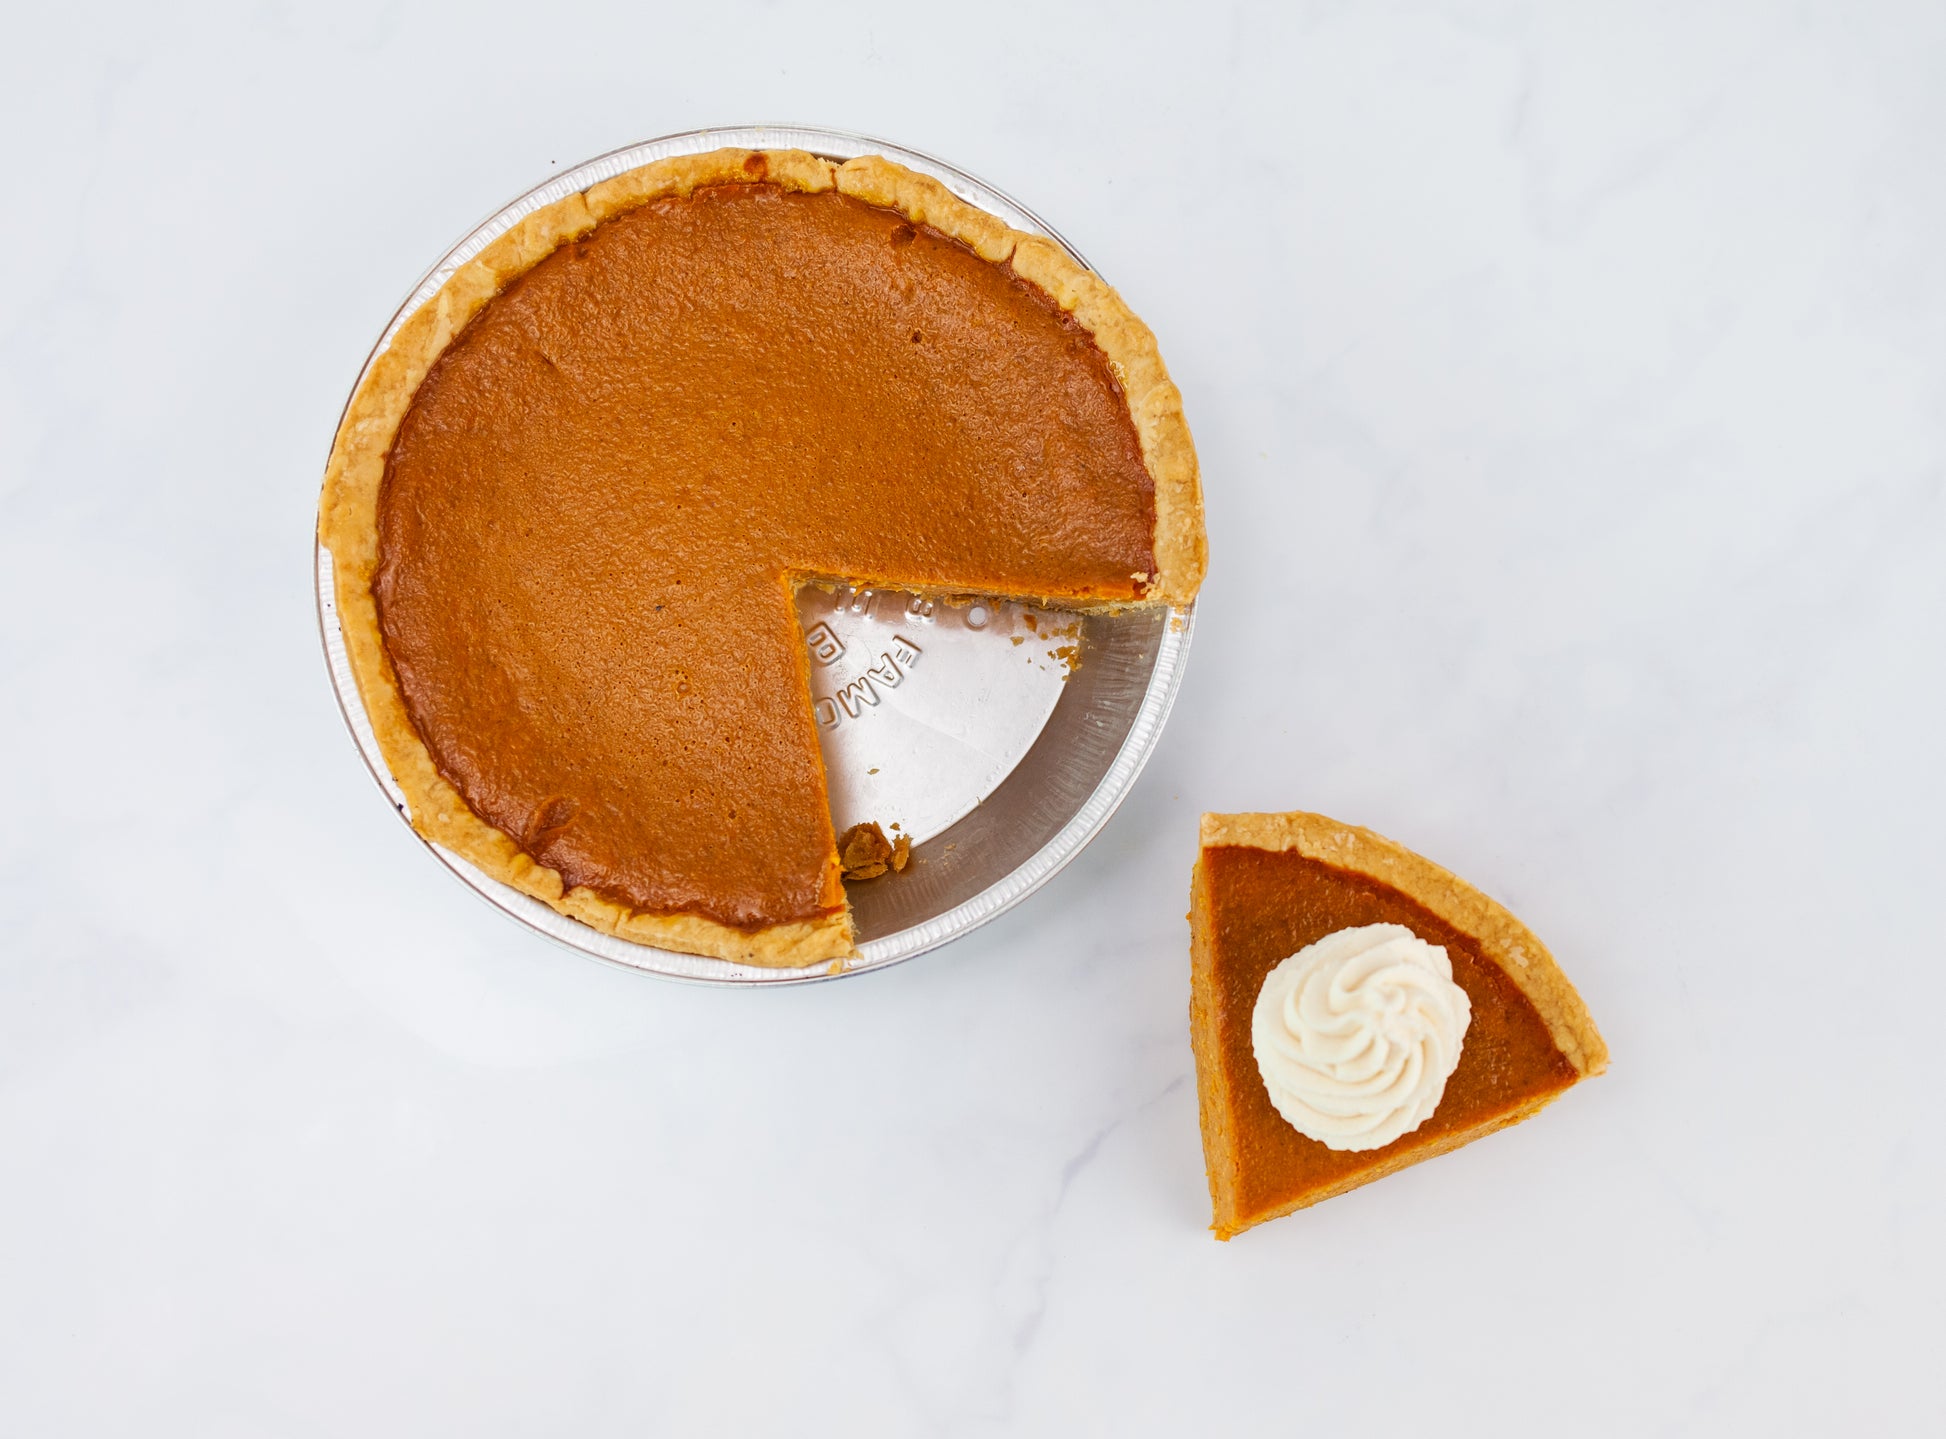 A whole Polly's pumpkin pie with a slice taken out of it sitting by a slice of Pumpkin pie topped with a dollop of real whipped cream on a white marble background.